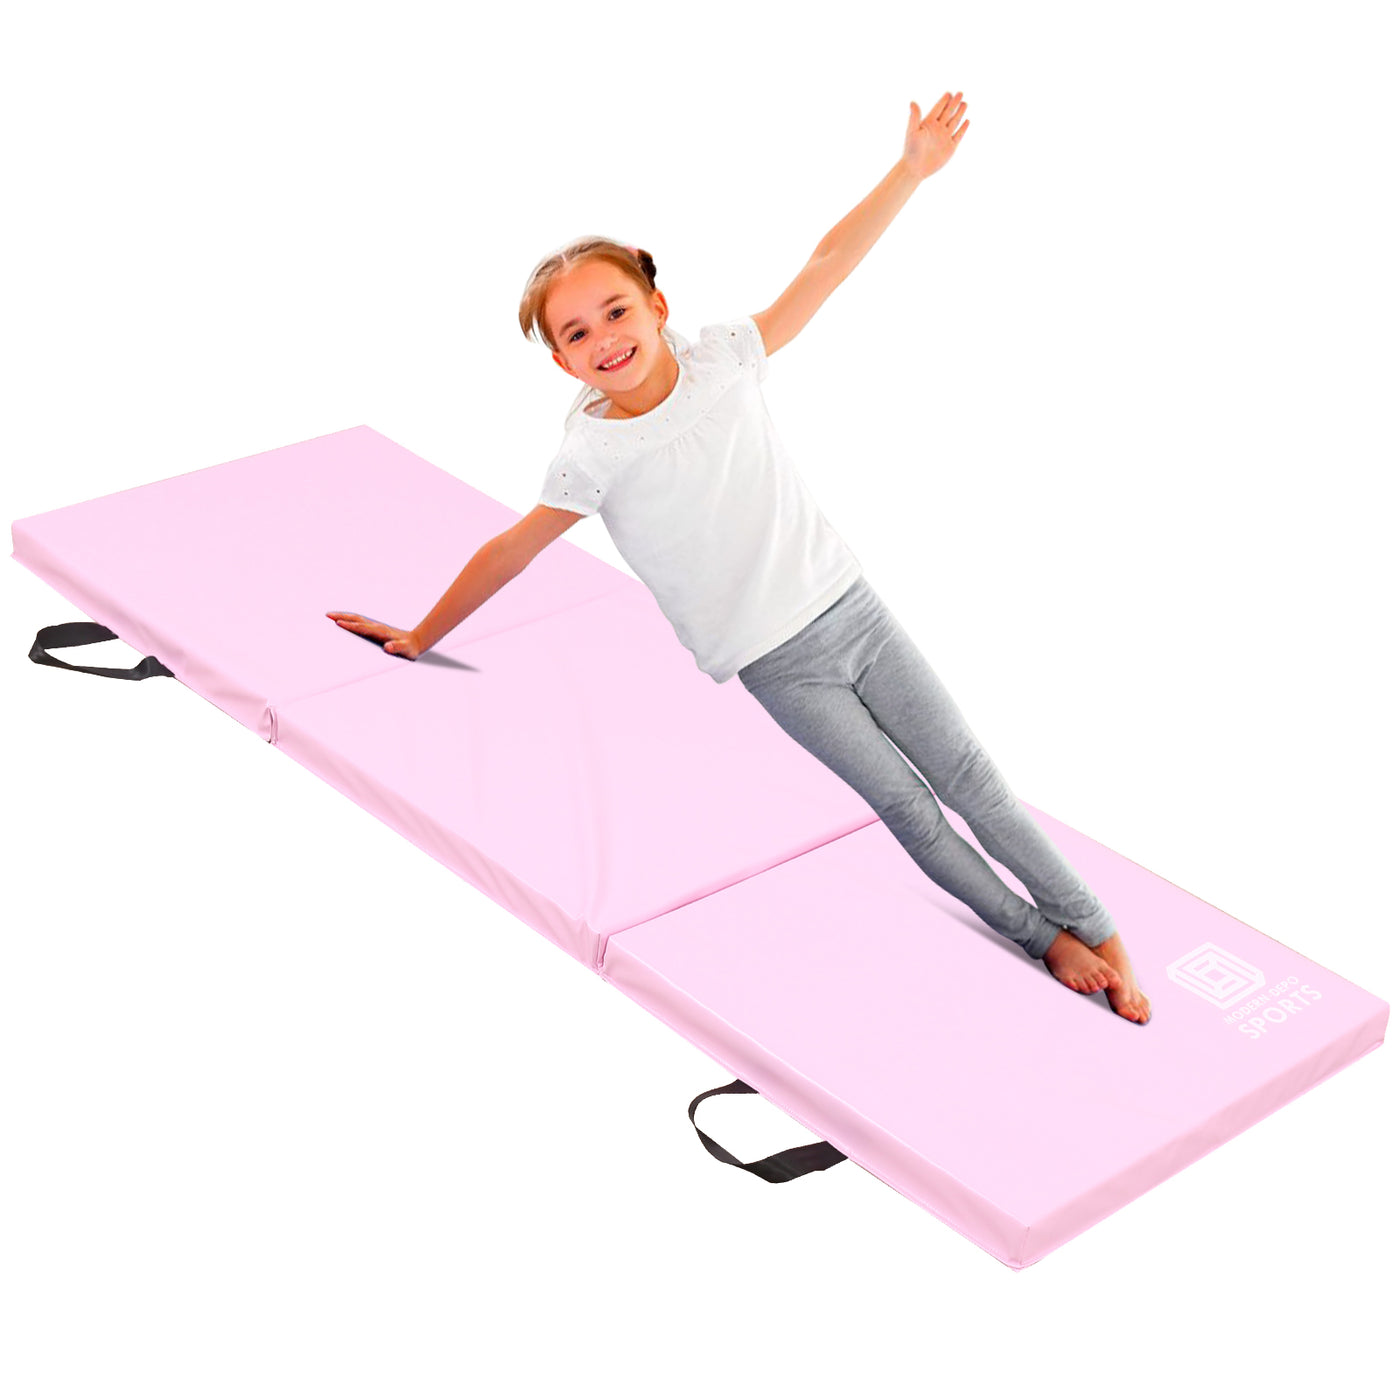 Gymnastics Mat 6'x2'x2" Foldable Tumbling Mats with Carrying Handles Three Fold Thick Exercise Mat for Home Aerobics Stretching Yoga, Pink